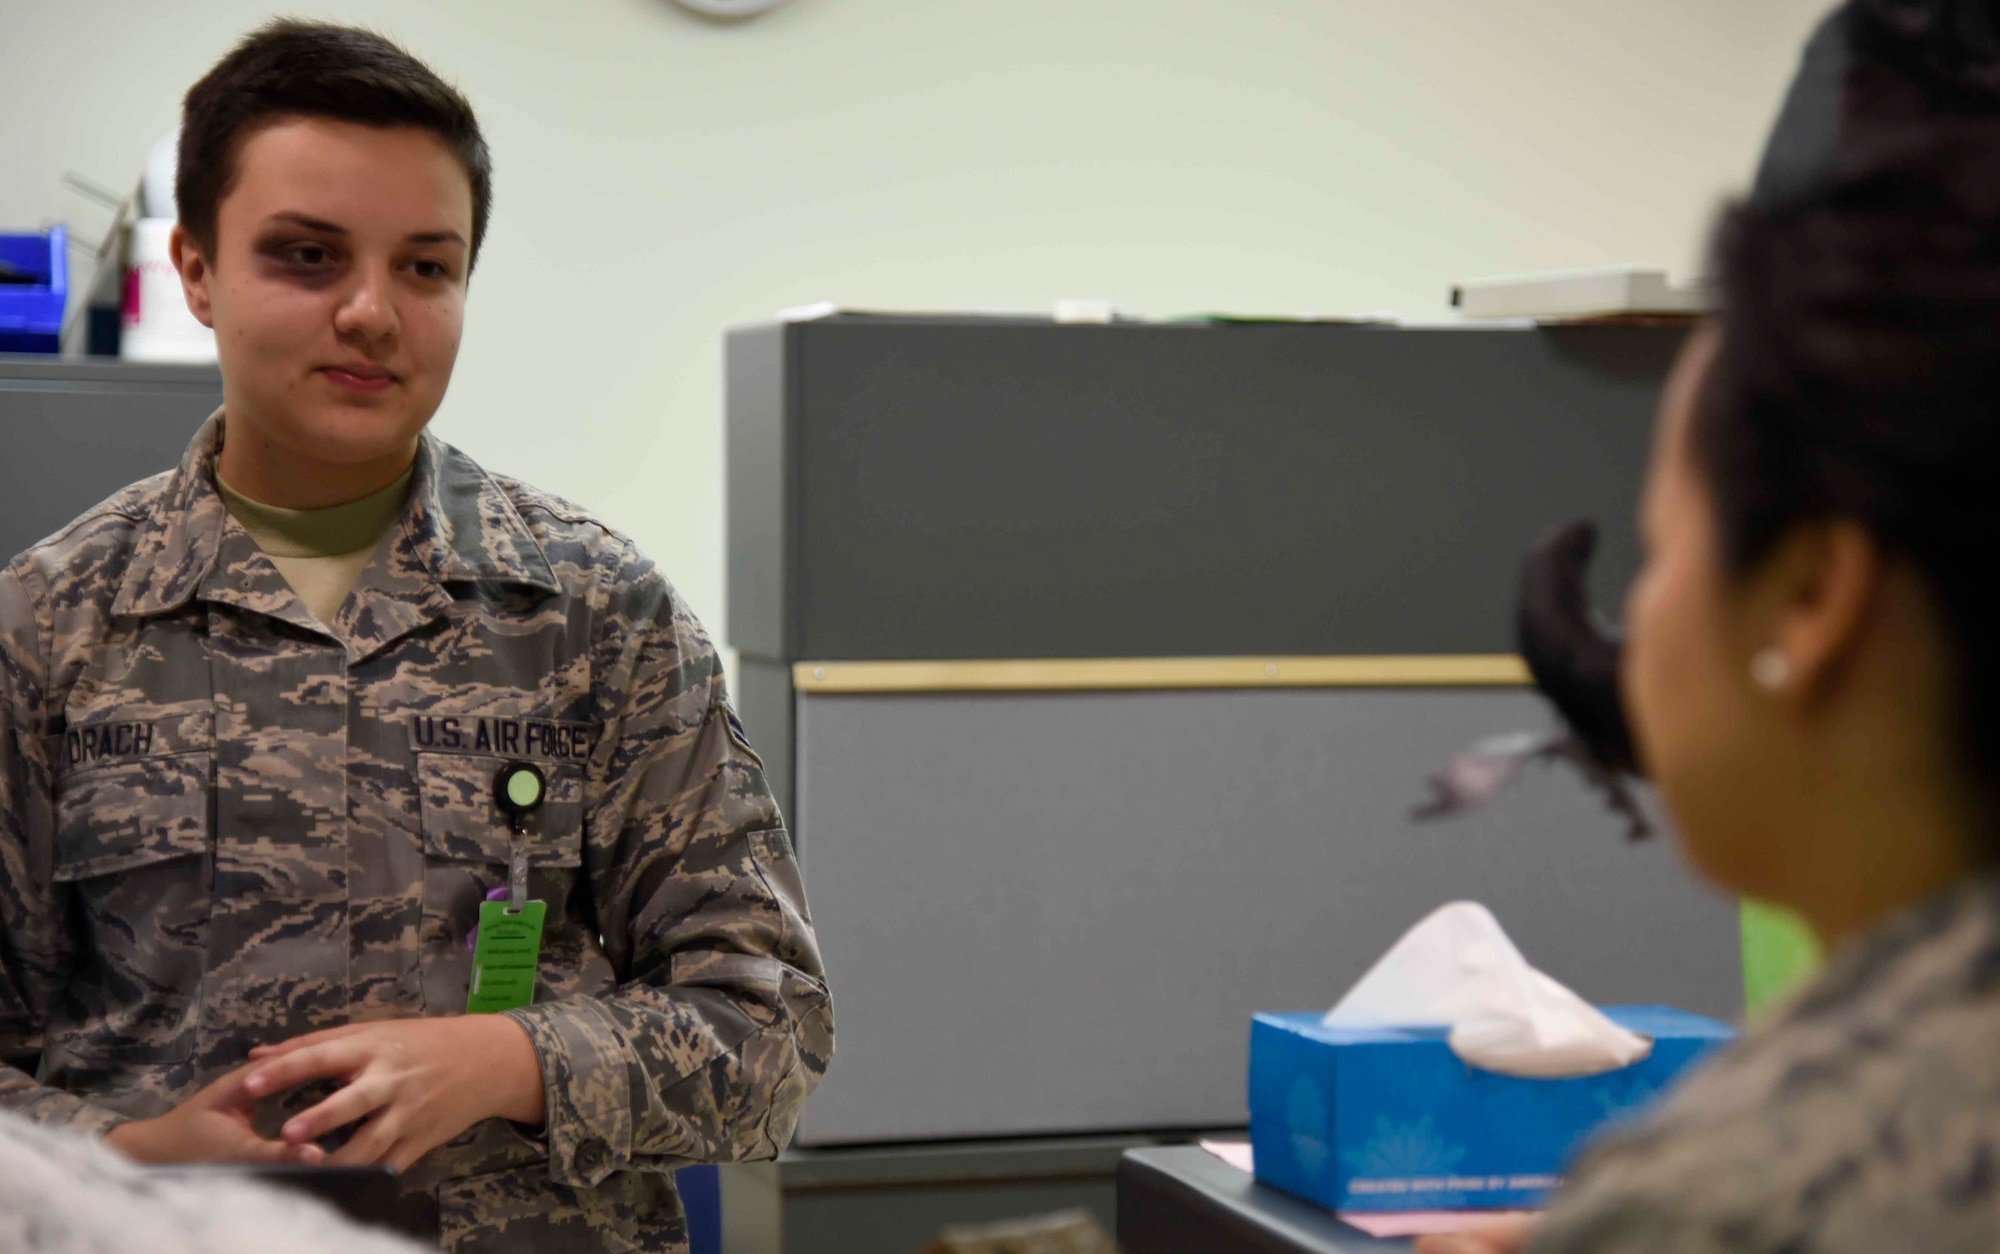 U.S. Air Force Airman 1st Class Monica Drach, 35th Medical Operations Squadron family practice administration technician, speaks to Master Sgt. Judy Khamphan, 35th Medical Support Squadron flight chief, at Misawa Air Base, Japan, Oct. 15, 2015. Khamphan showed concern for Drach upon noticing her black eye, which was makeup applied for the "In Your Face Black Eye Campaign." Reactions like this were recorded and reviewed by family health to determine where to focus their outreach programs. (U.S. Air Force photo by Airman 1st Class Jordyn Fetter/Released) 